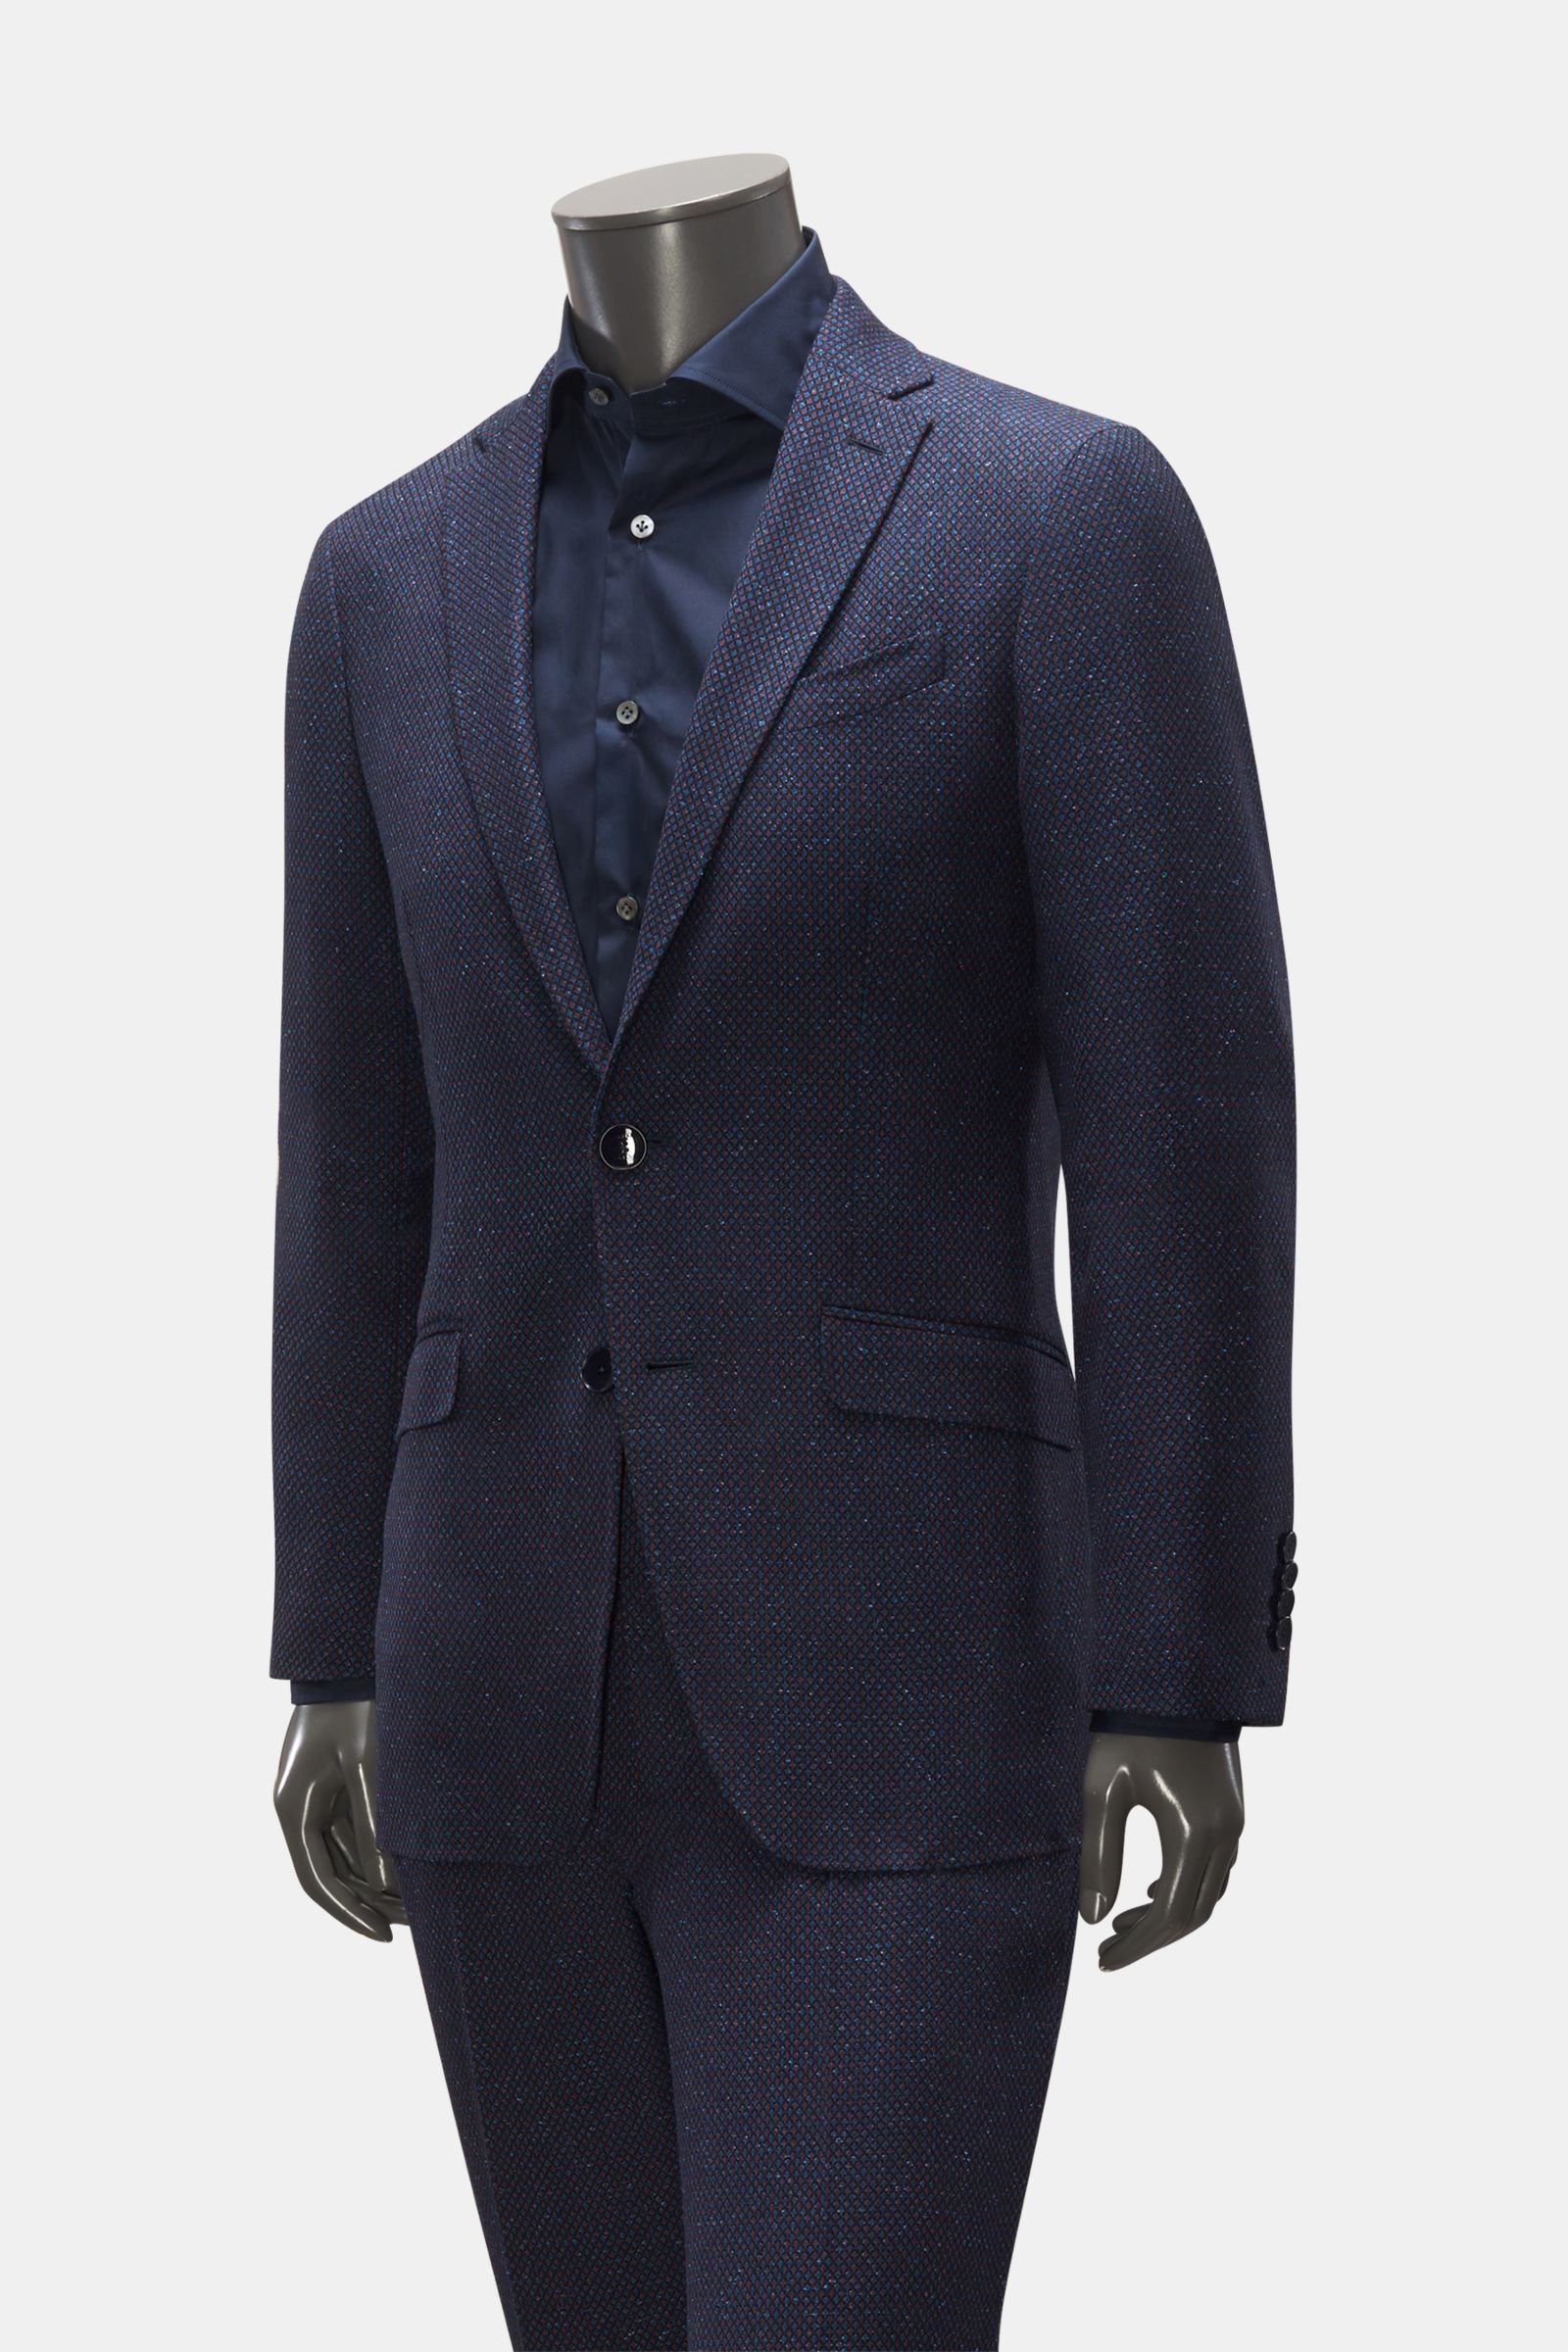 Suit navy/azure/red checked